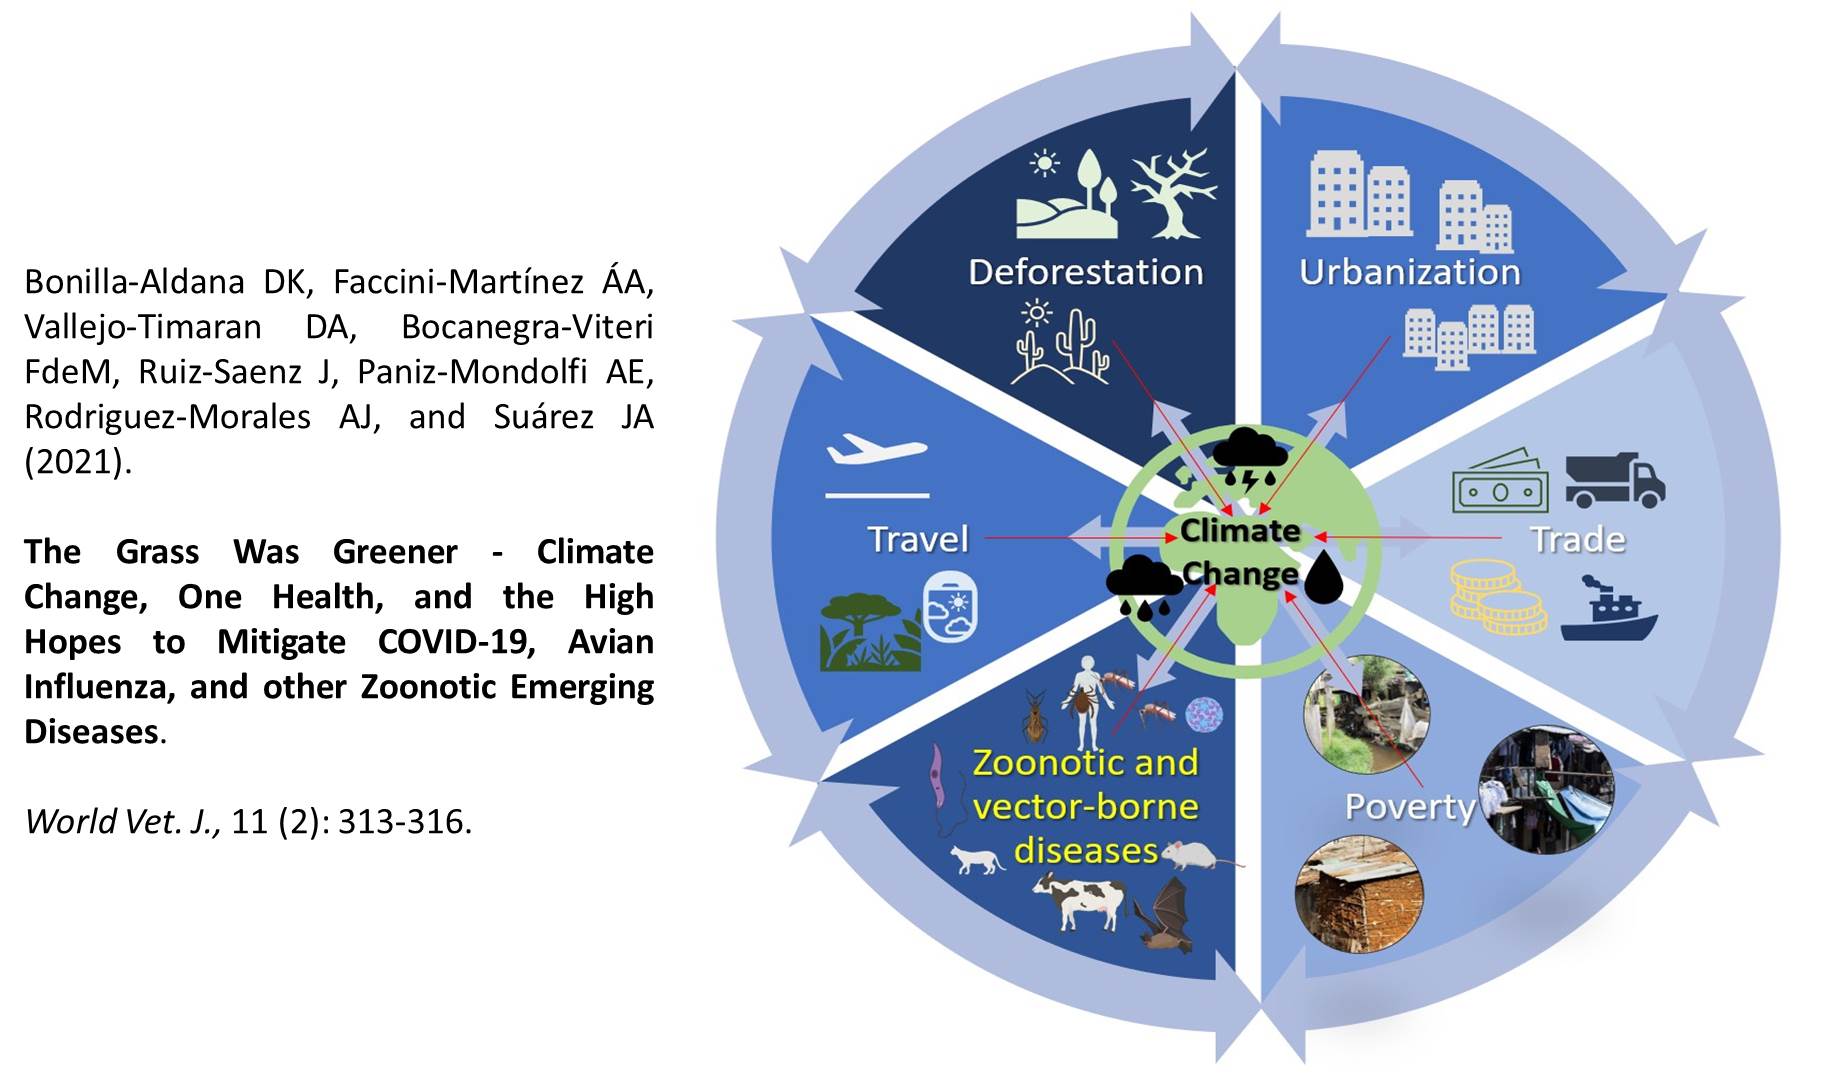 46-Climate_Change_One_Health_and_the_High_Hopes_to_Mitigate_COVID-19